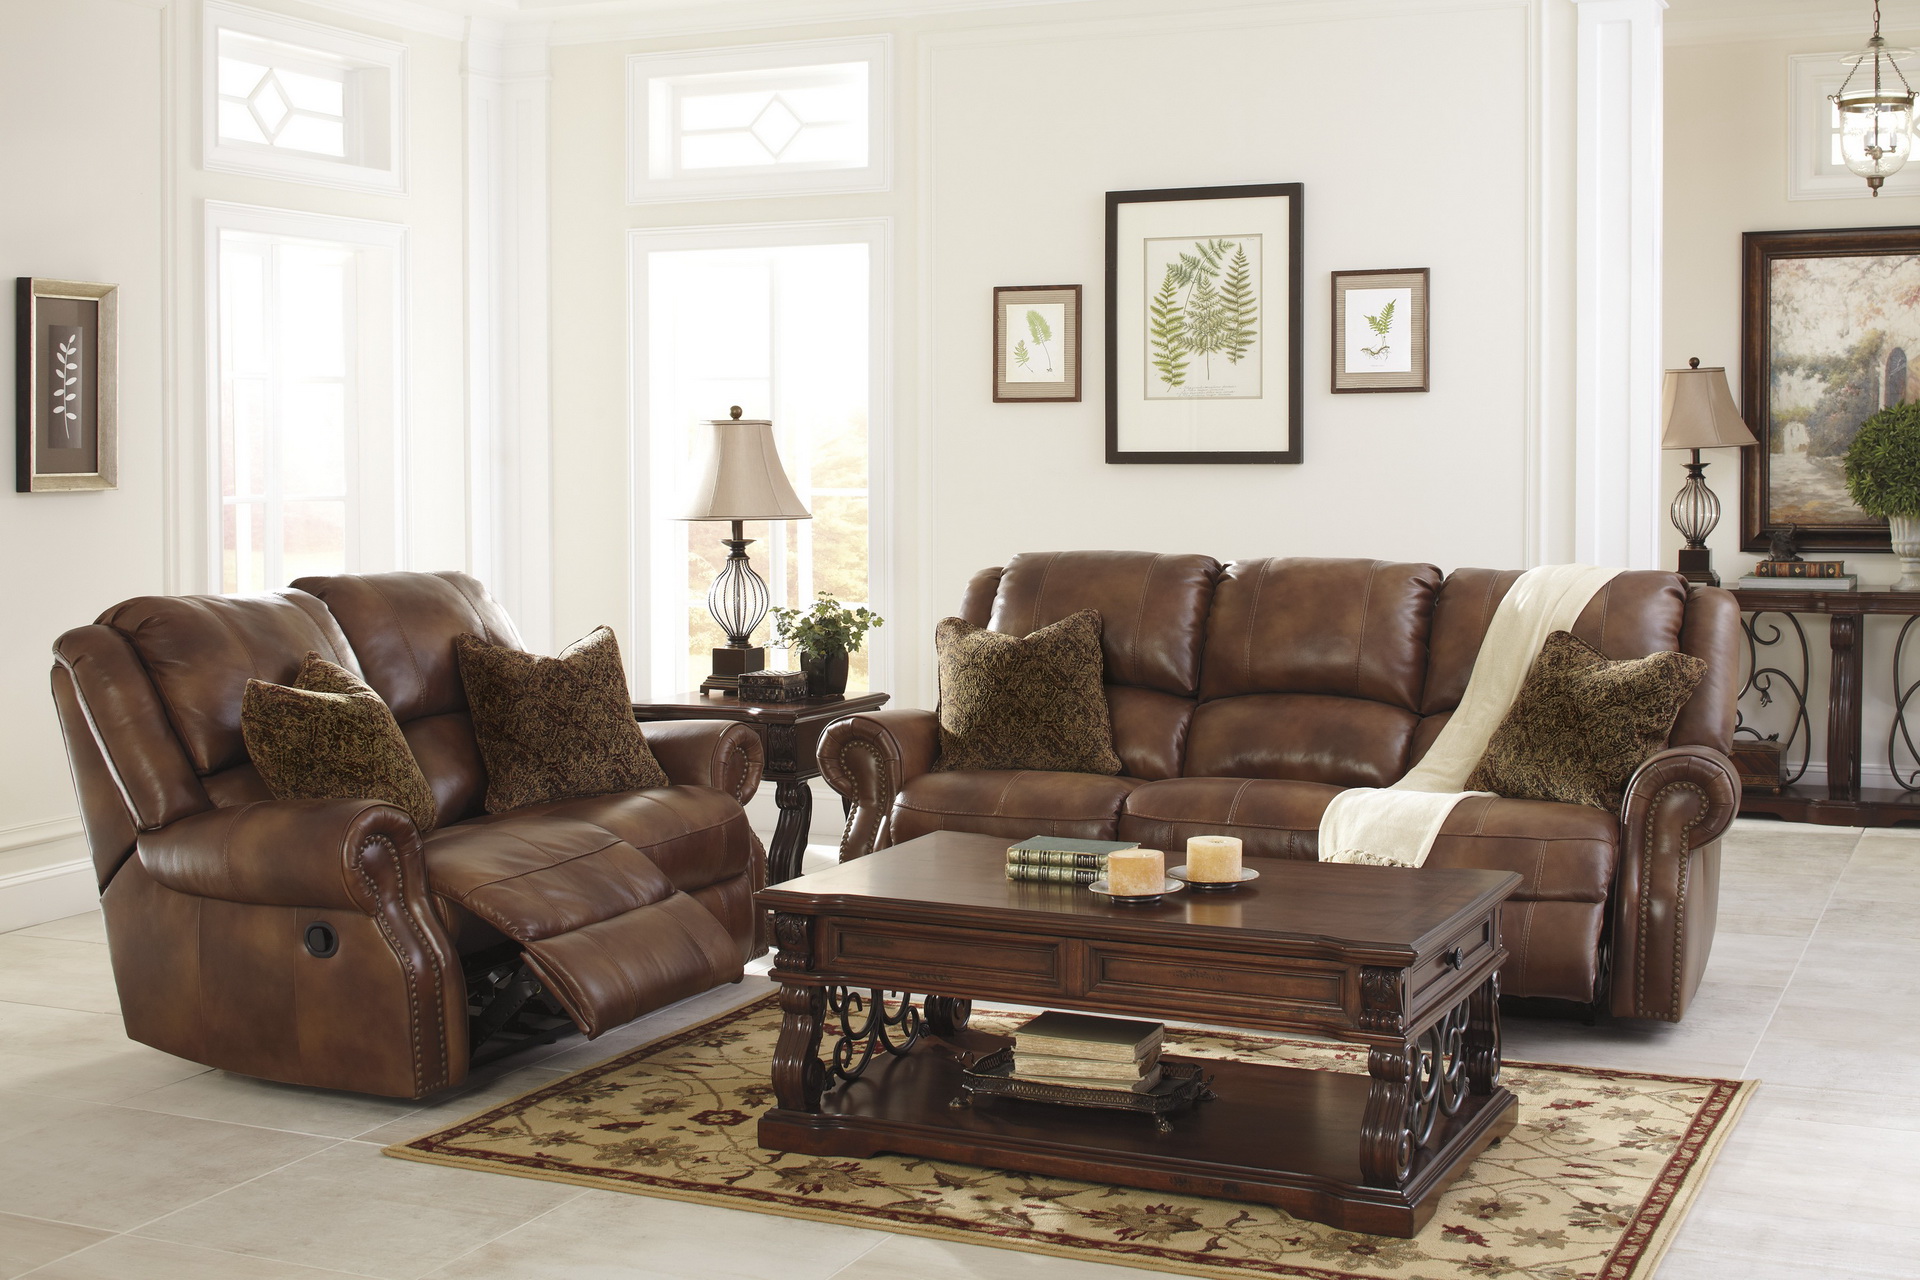 25 facts to know about Ashley furniture living room sets | Hawk Haven